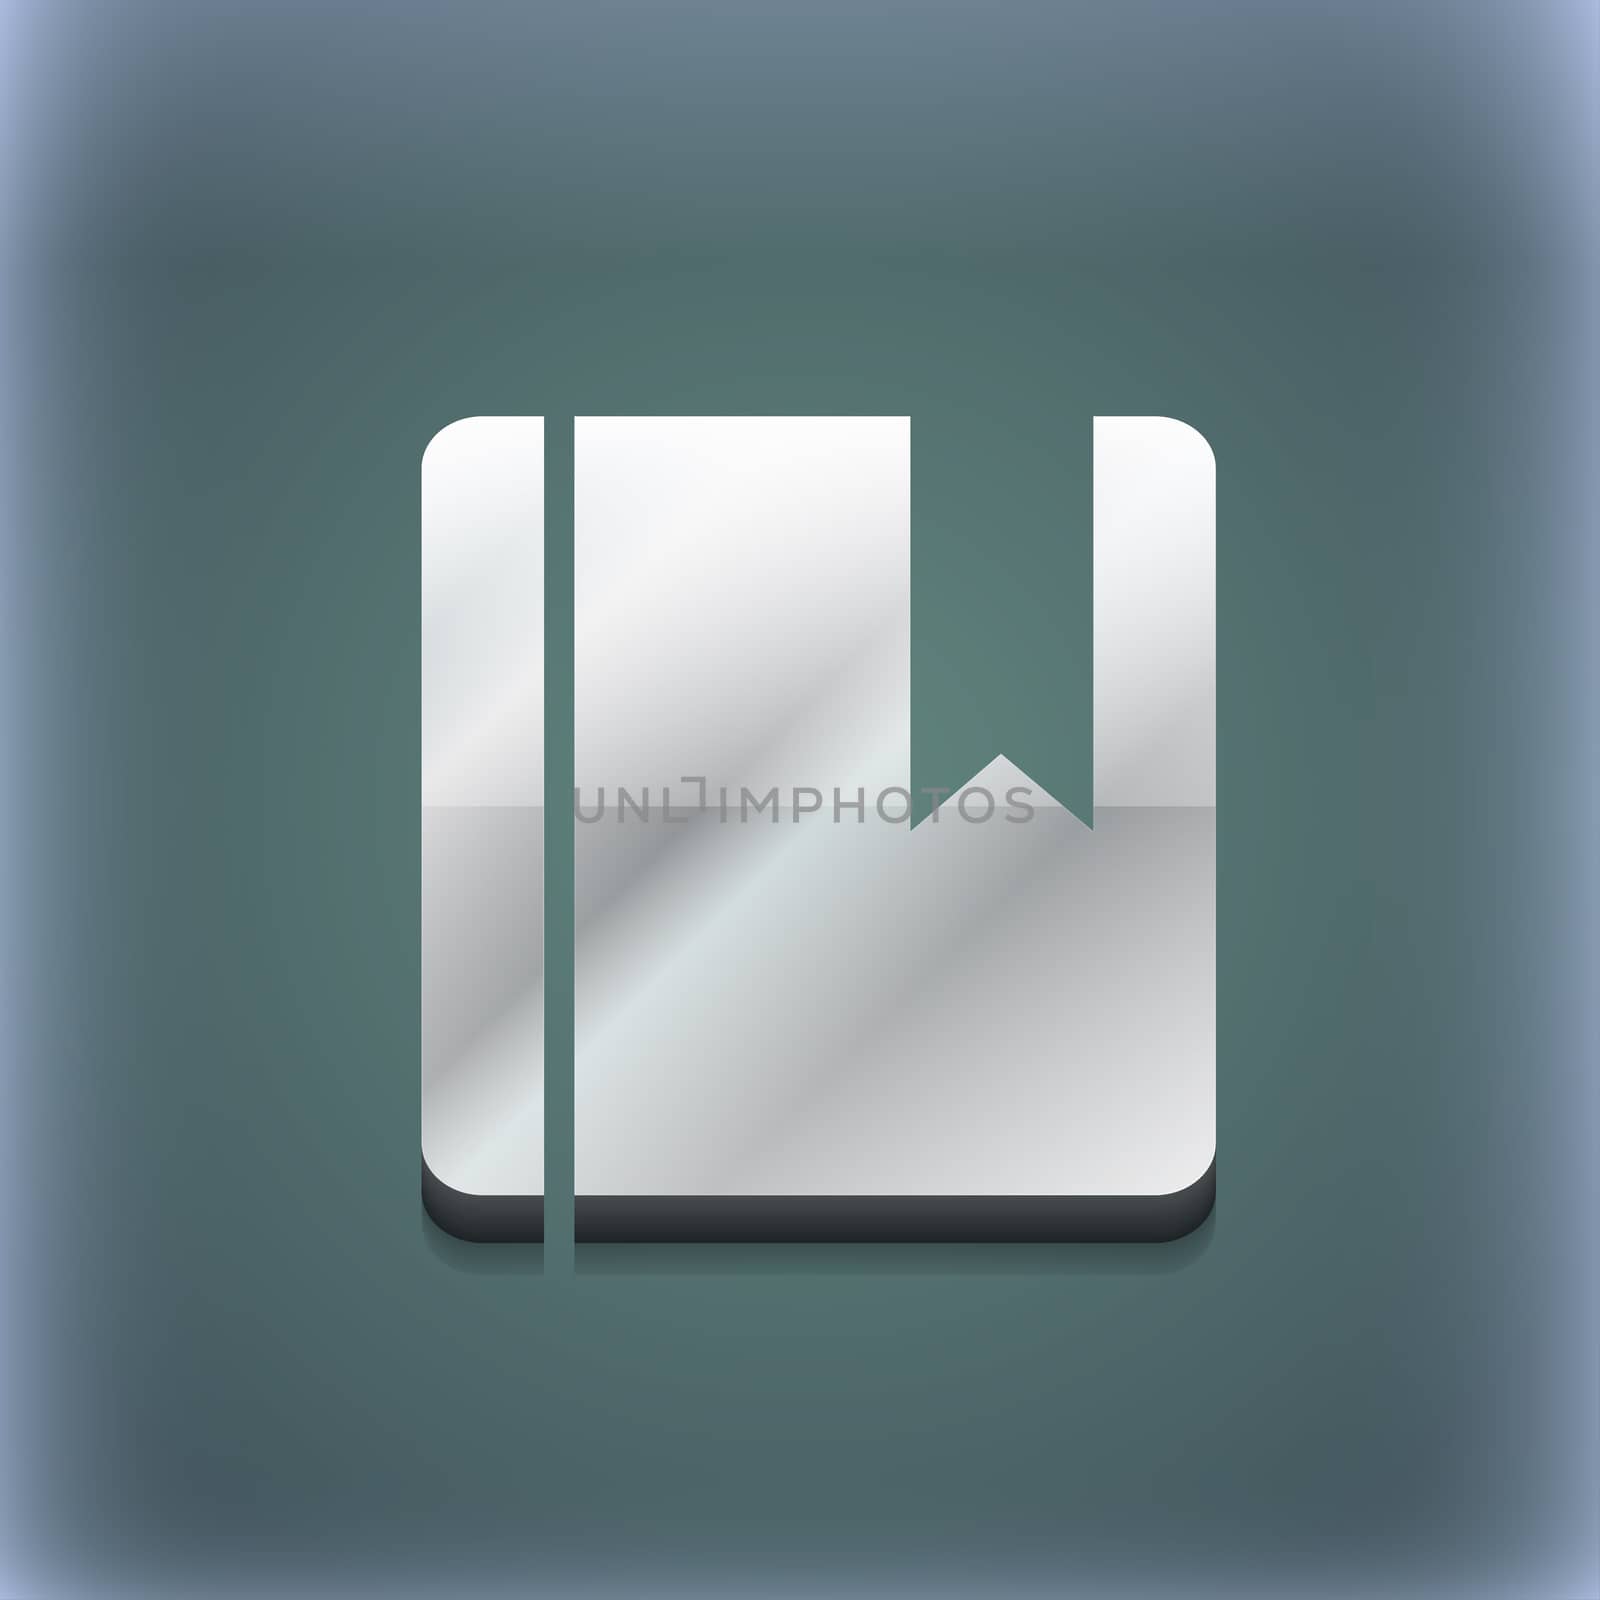 book bookmark icon symbol. 3D style. Trendy, modern design with space for your text illustration. Raster version